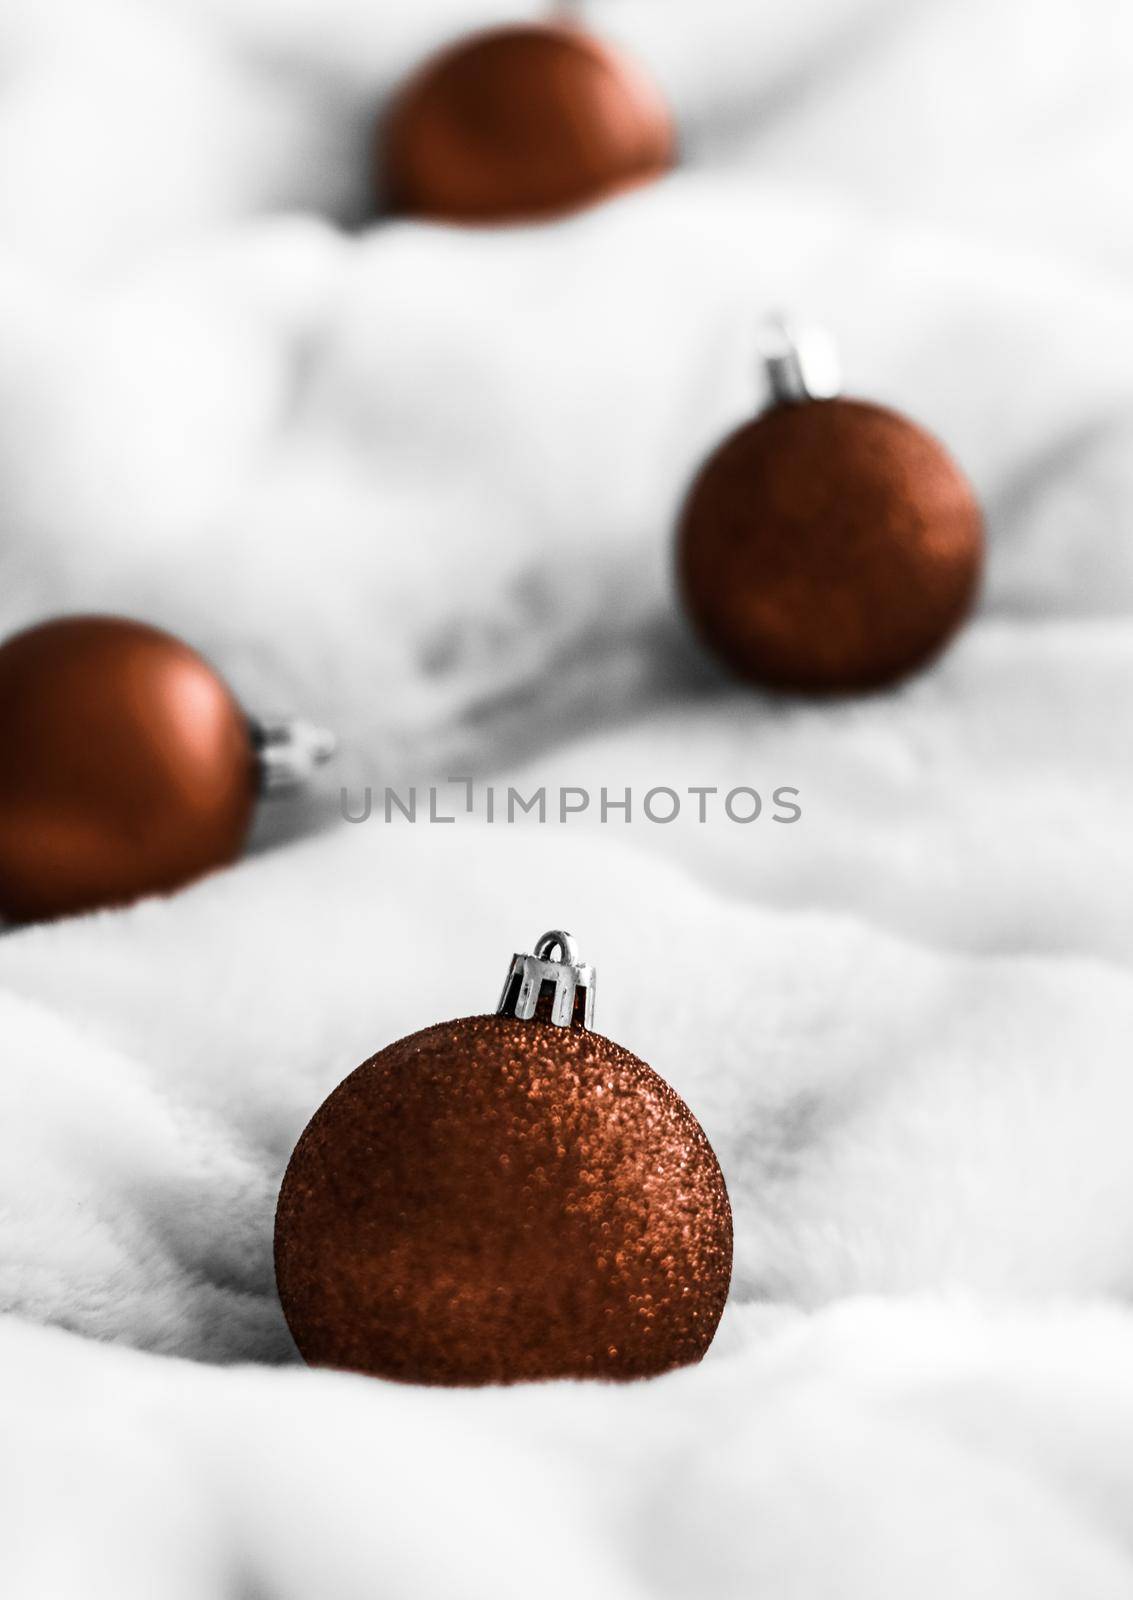 Gift decor, New Years Eve and happy celebration concept - Chocolate brown Christmas baubles on white fluffy fur backdrop, luxury winter holiday design background